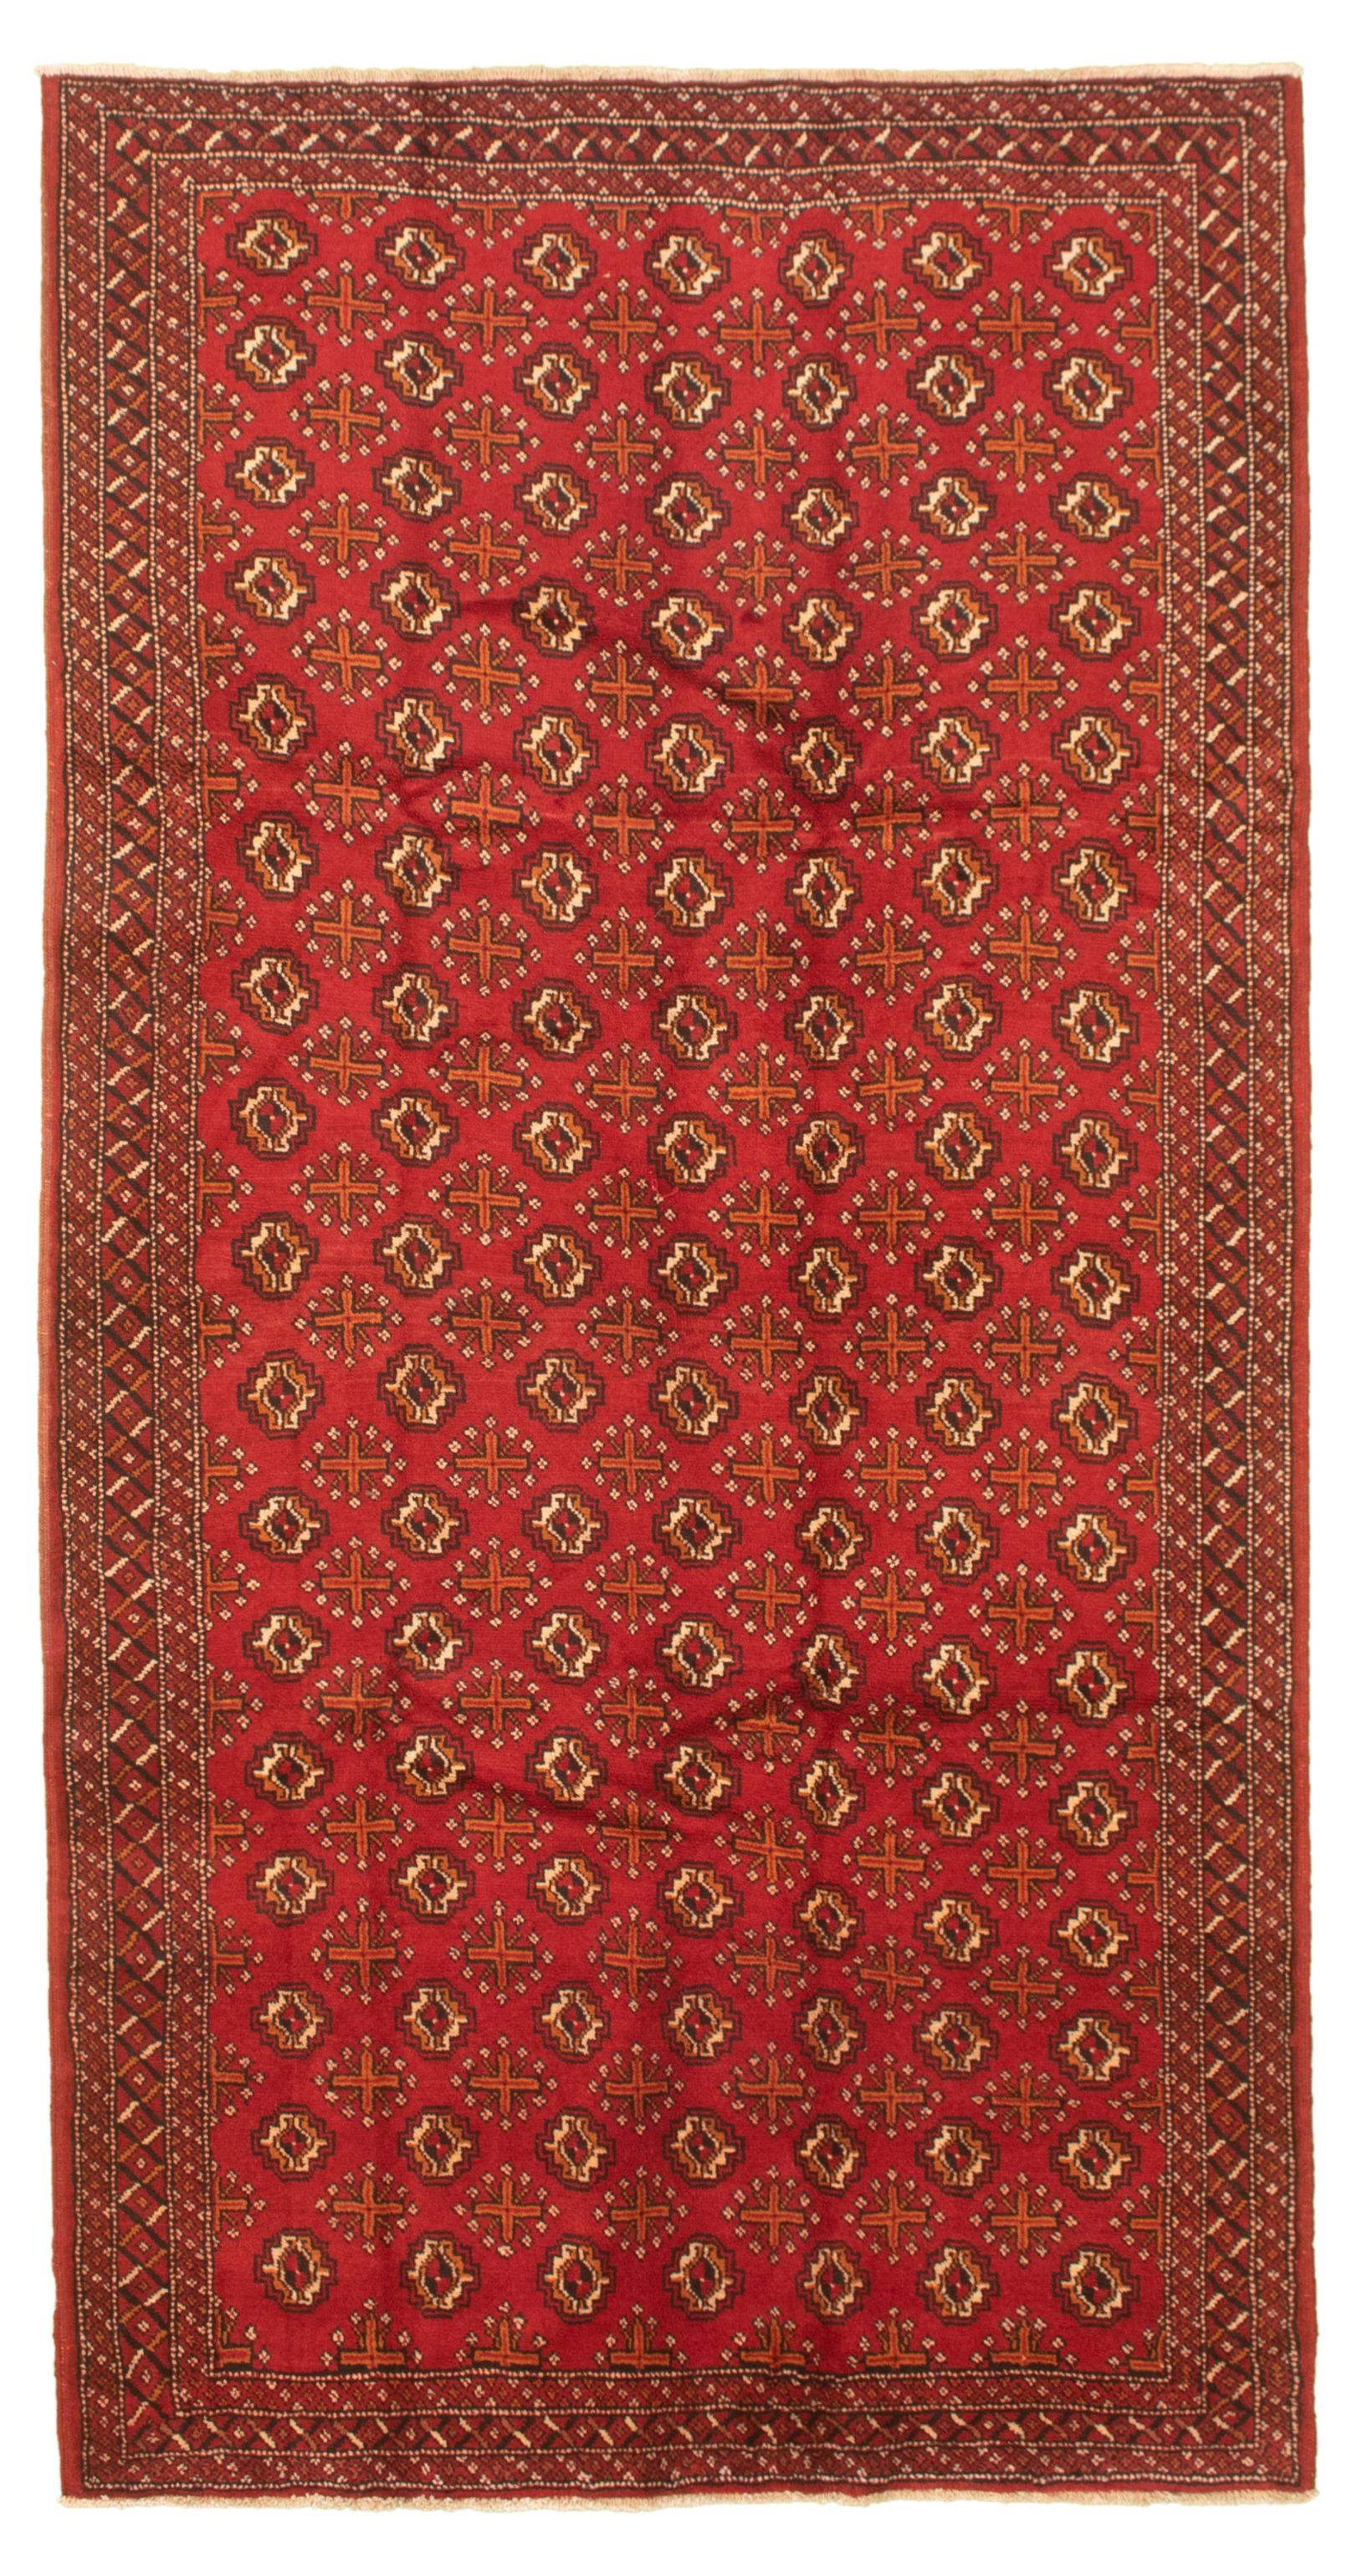 Hand-knotted Authentic Turkish Red Wool Rug 5'1" x 9'10" Size: 5'1" x 9'10"  